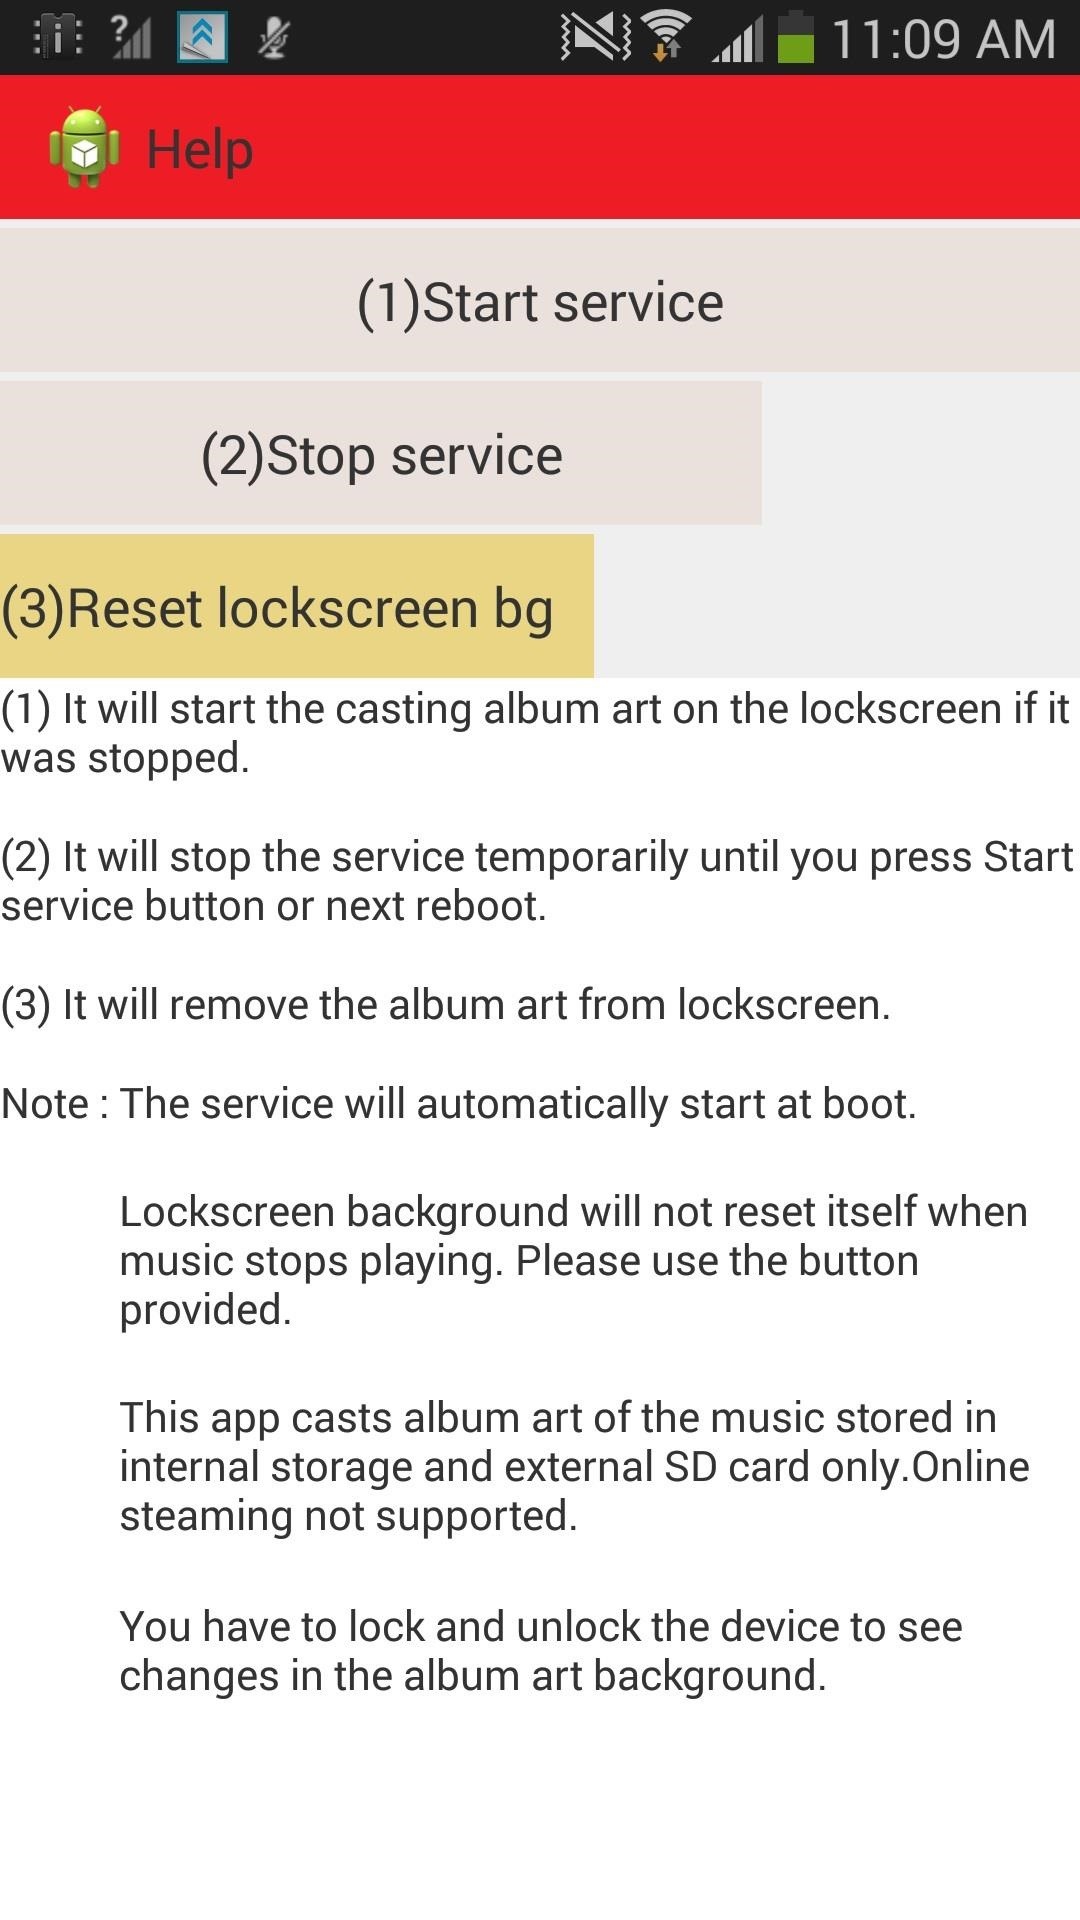 How to Get a KitKat-Style Music Lock Screen on Your Samsung Galaxy Note 3